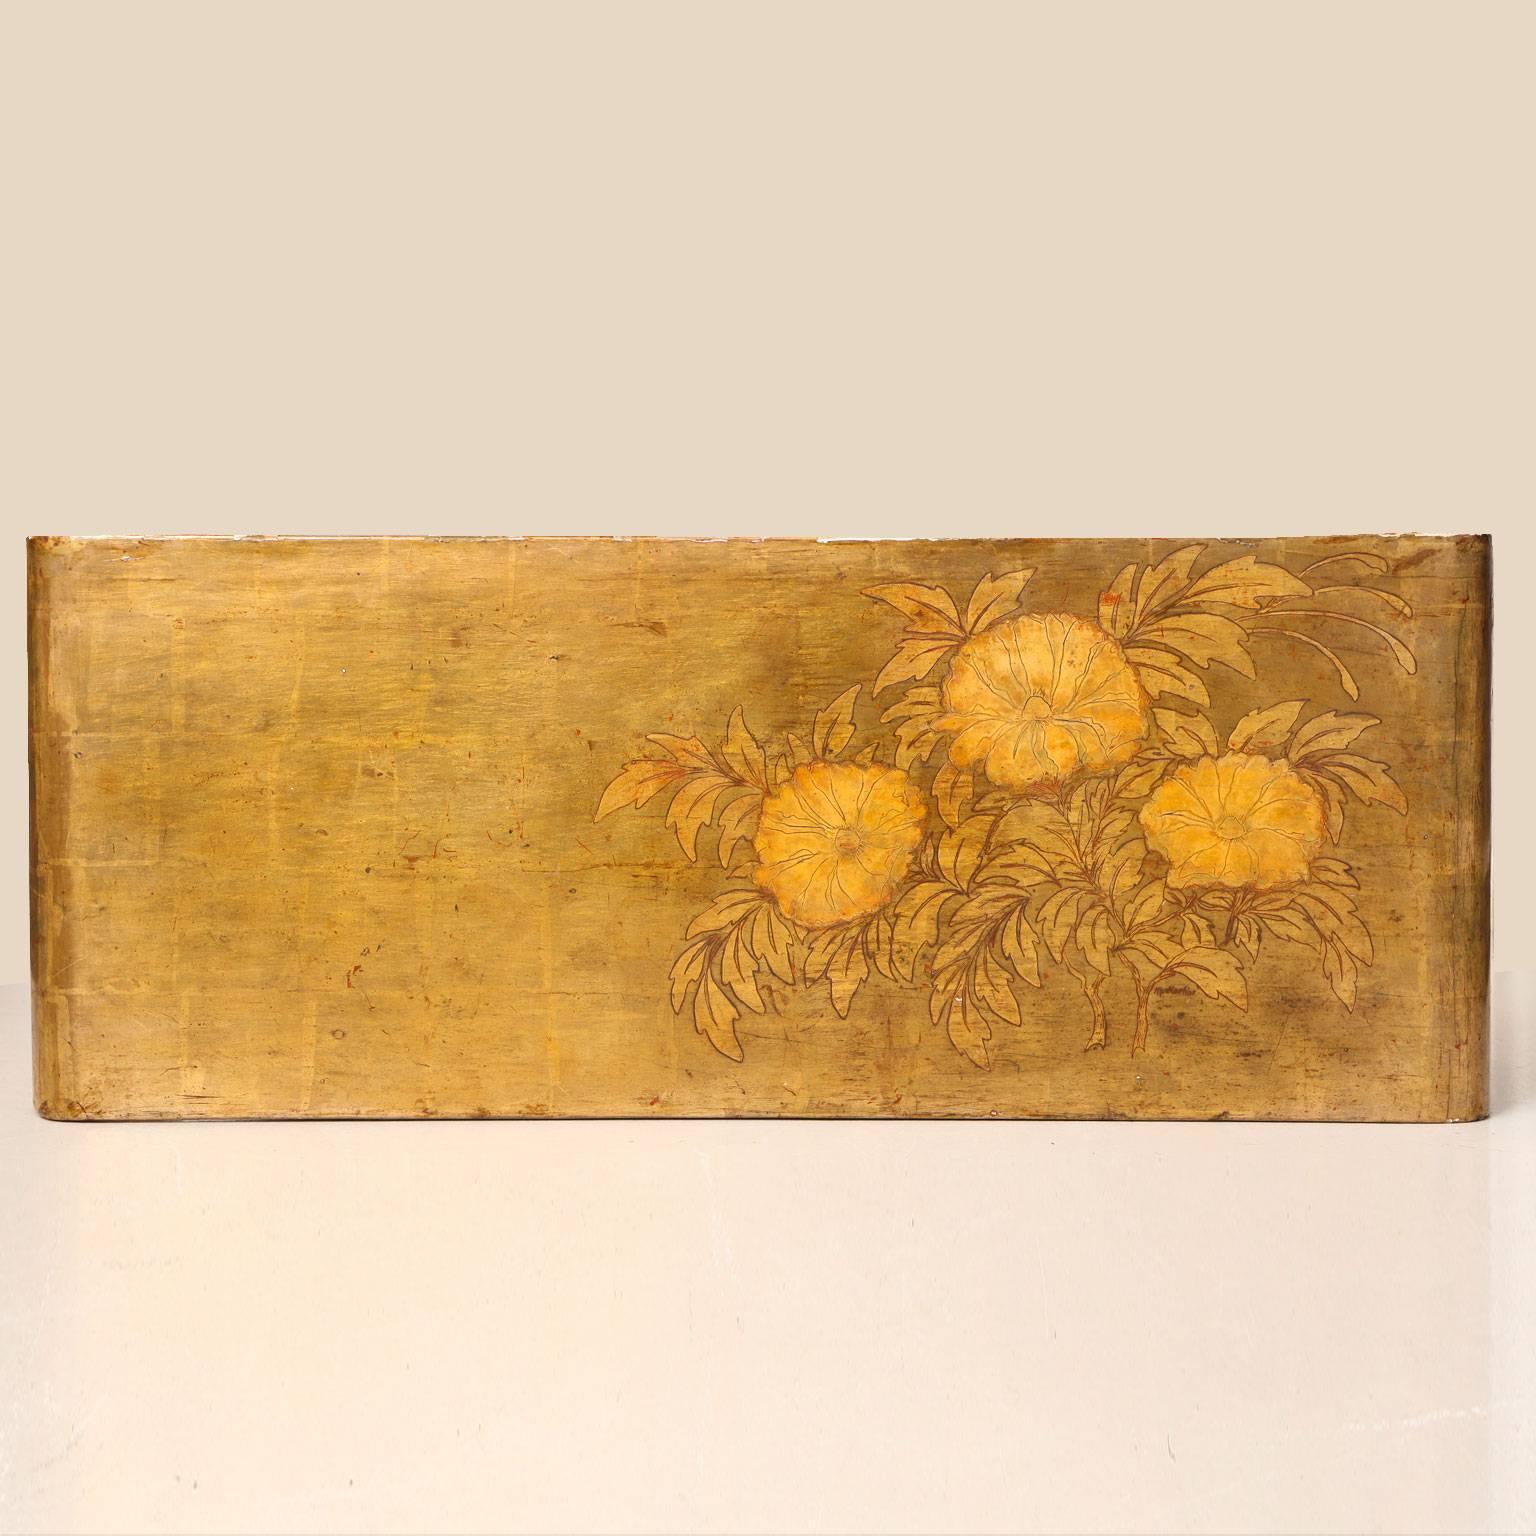 MAX KUEHNE (1880-1968)
Low rectangular waterfall table with 
gilded and incised gesso floral painted decoration.
Signed: Max Kuehne
American, c. 1935
